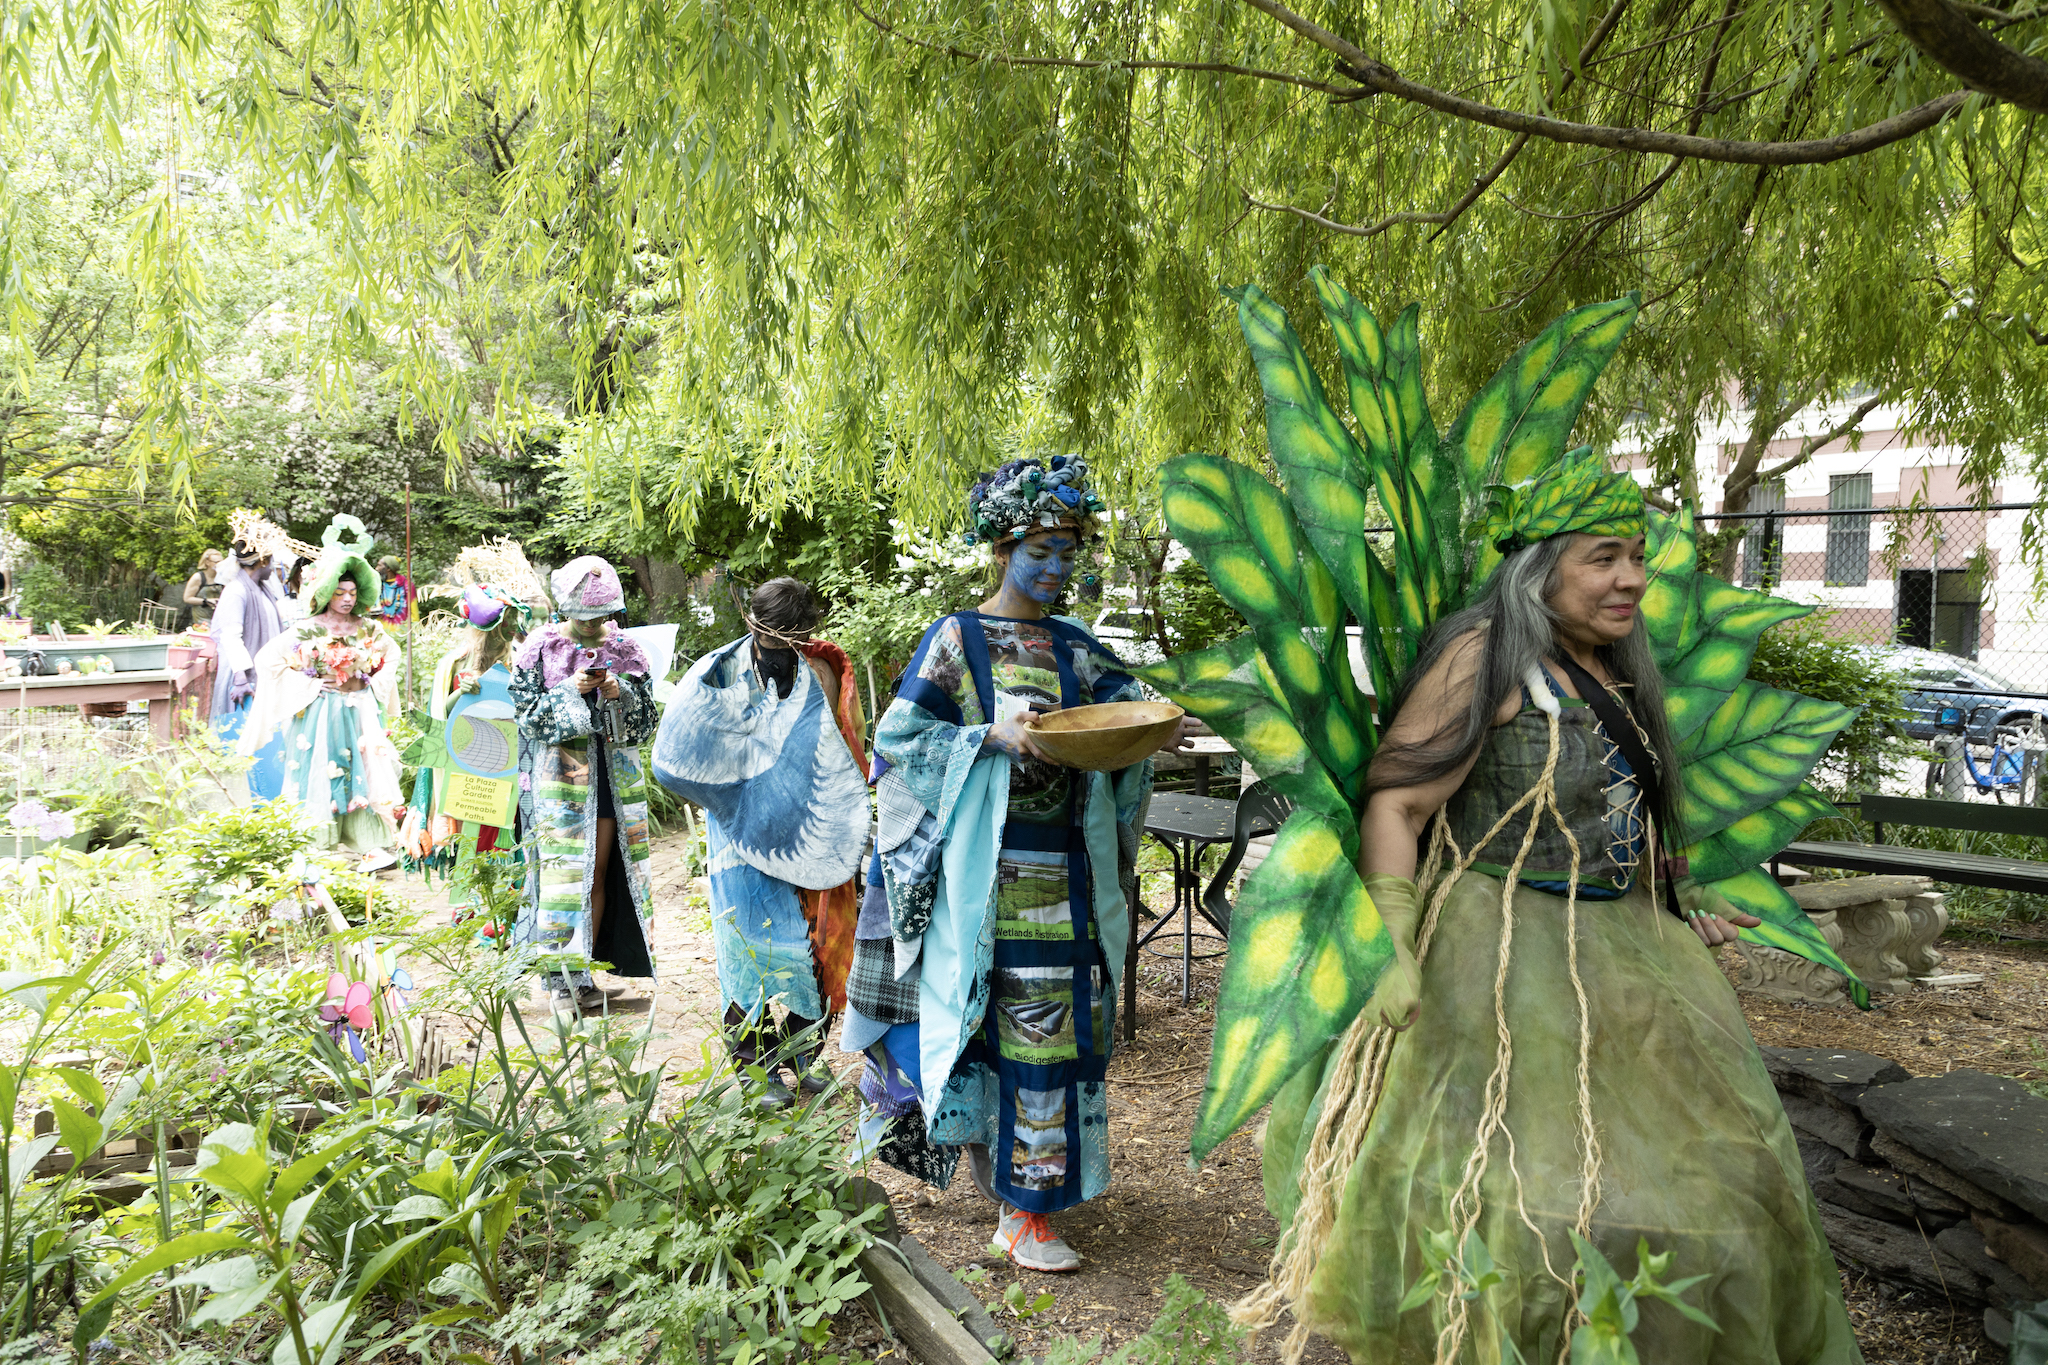 People in costumes walk through a community garden.